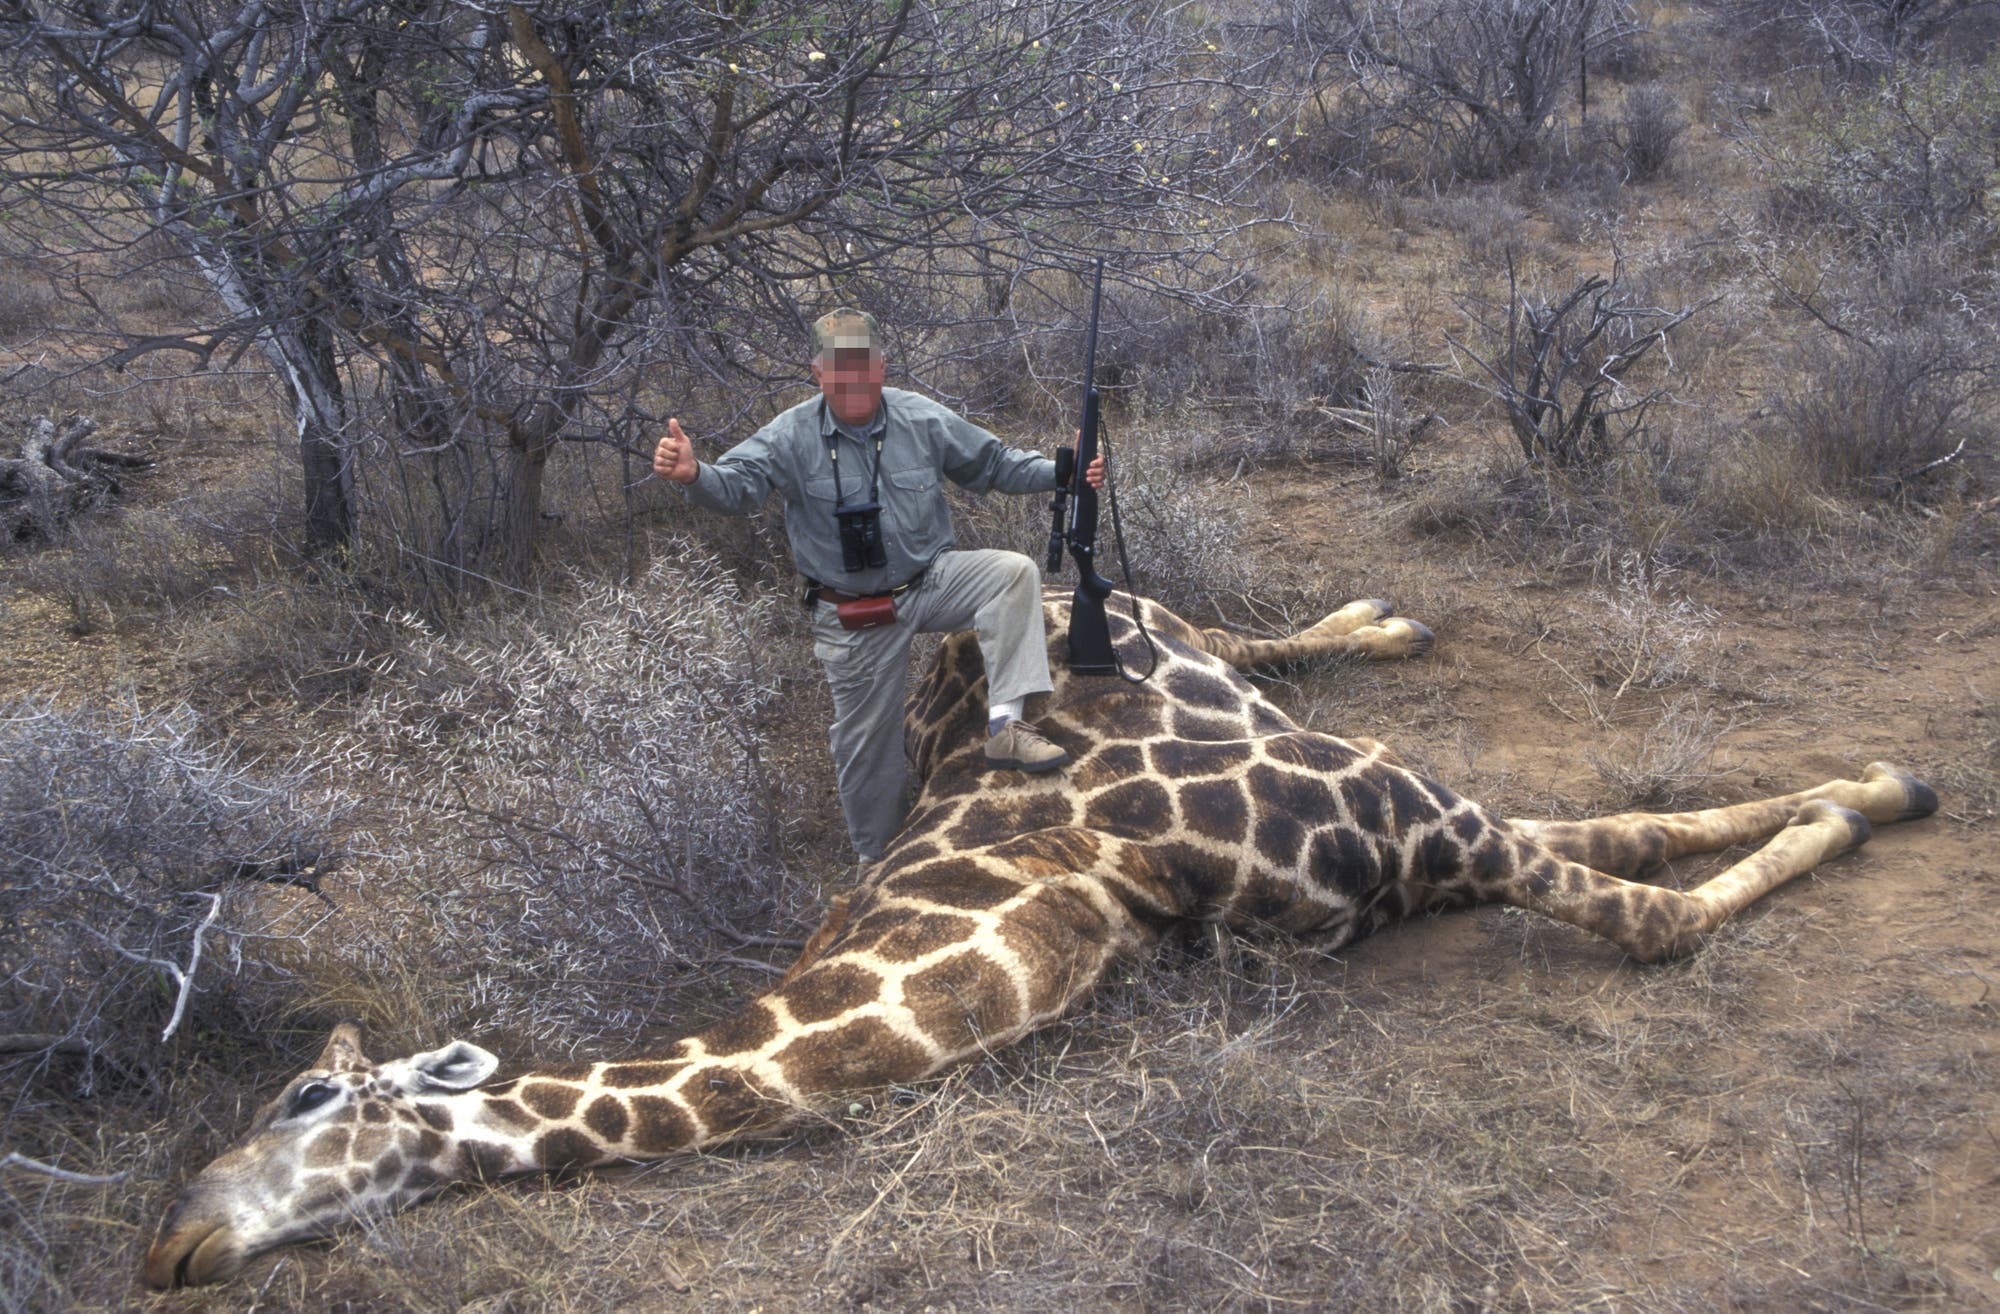 In the south of Africa, giraffe populations are stable enough in many places that authorities allow trophy hunting.   